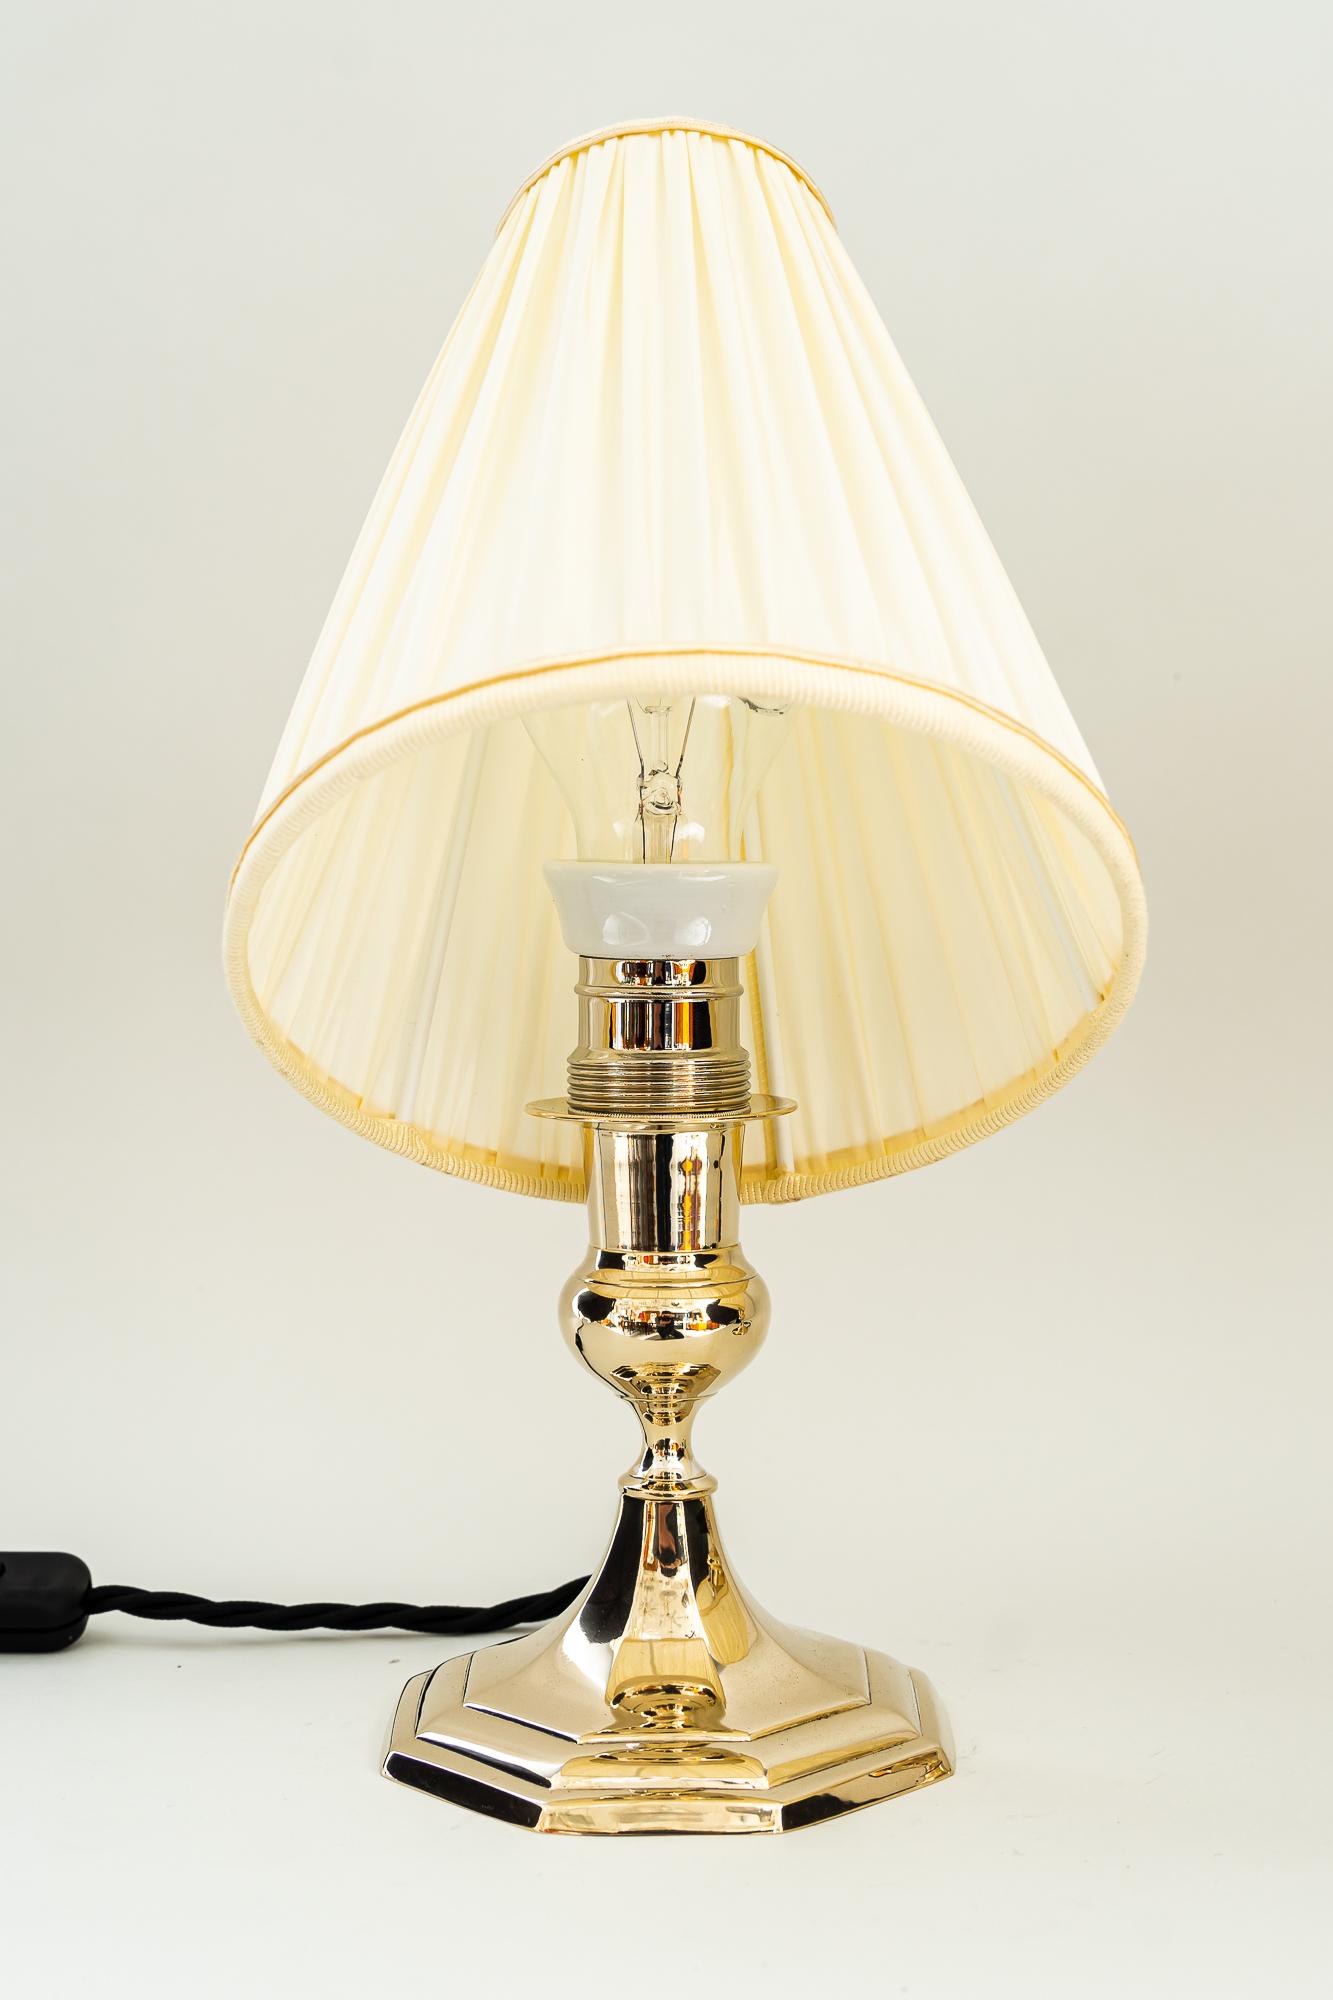 2 Art Deco Table Lamps with Fabric Shades, Vienna, Around 1920s  For Sale 2